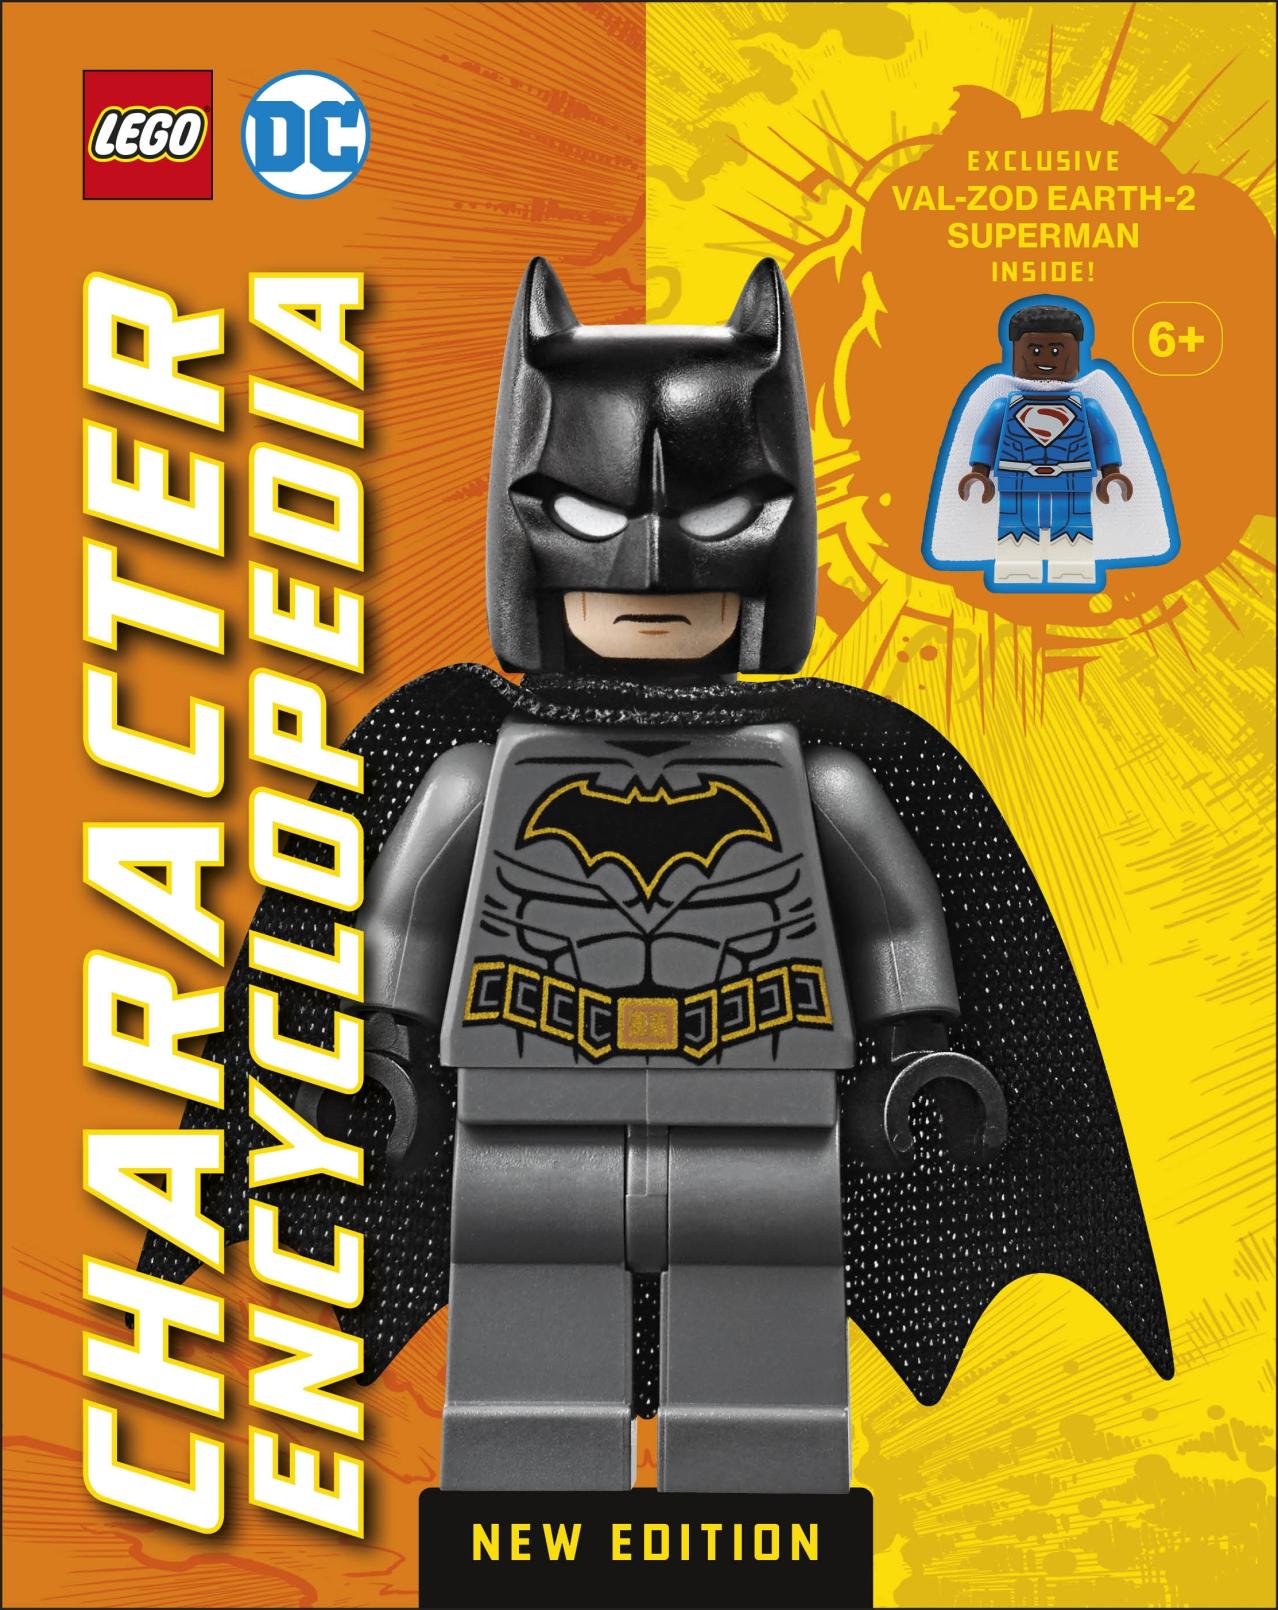 Lego DC Character Encyclopedia New Edition with Exclusive Lego Minifigure